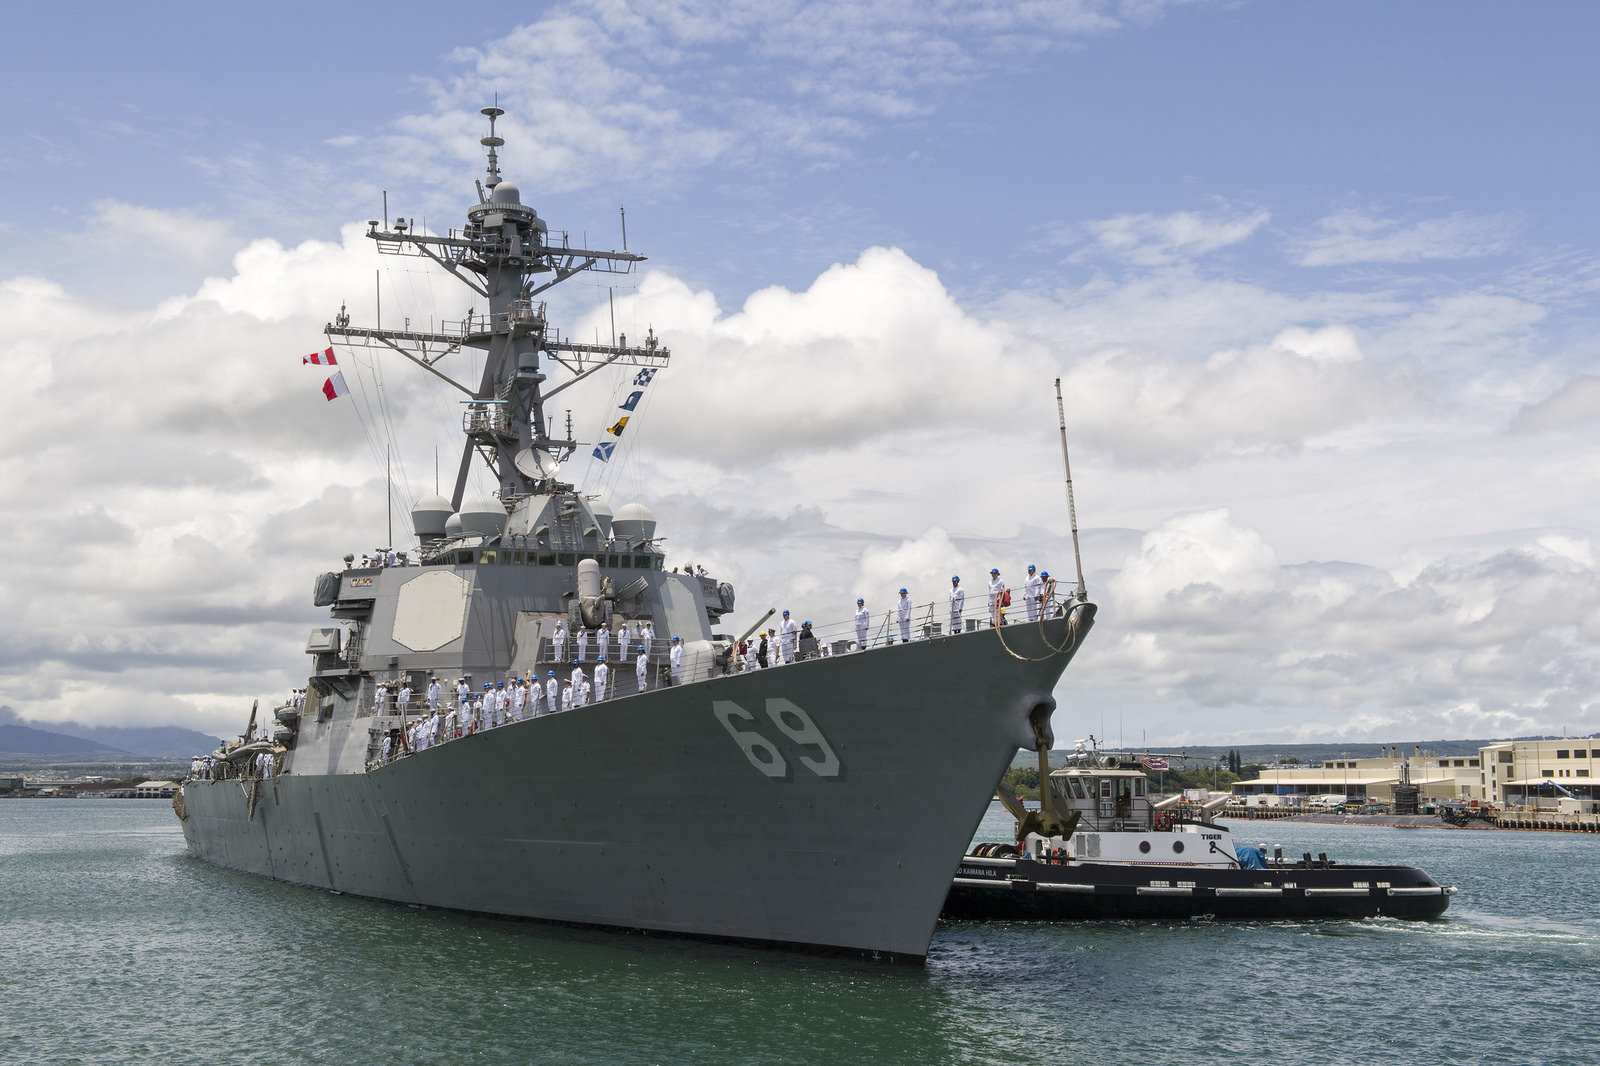 The Arleigh Burke-class guided-missile destroyer USS Milius (DDG 69) arrives in Pearl Harbor